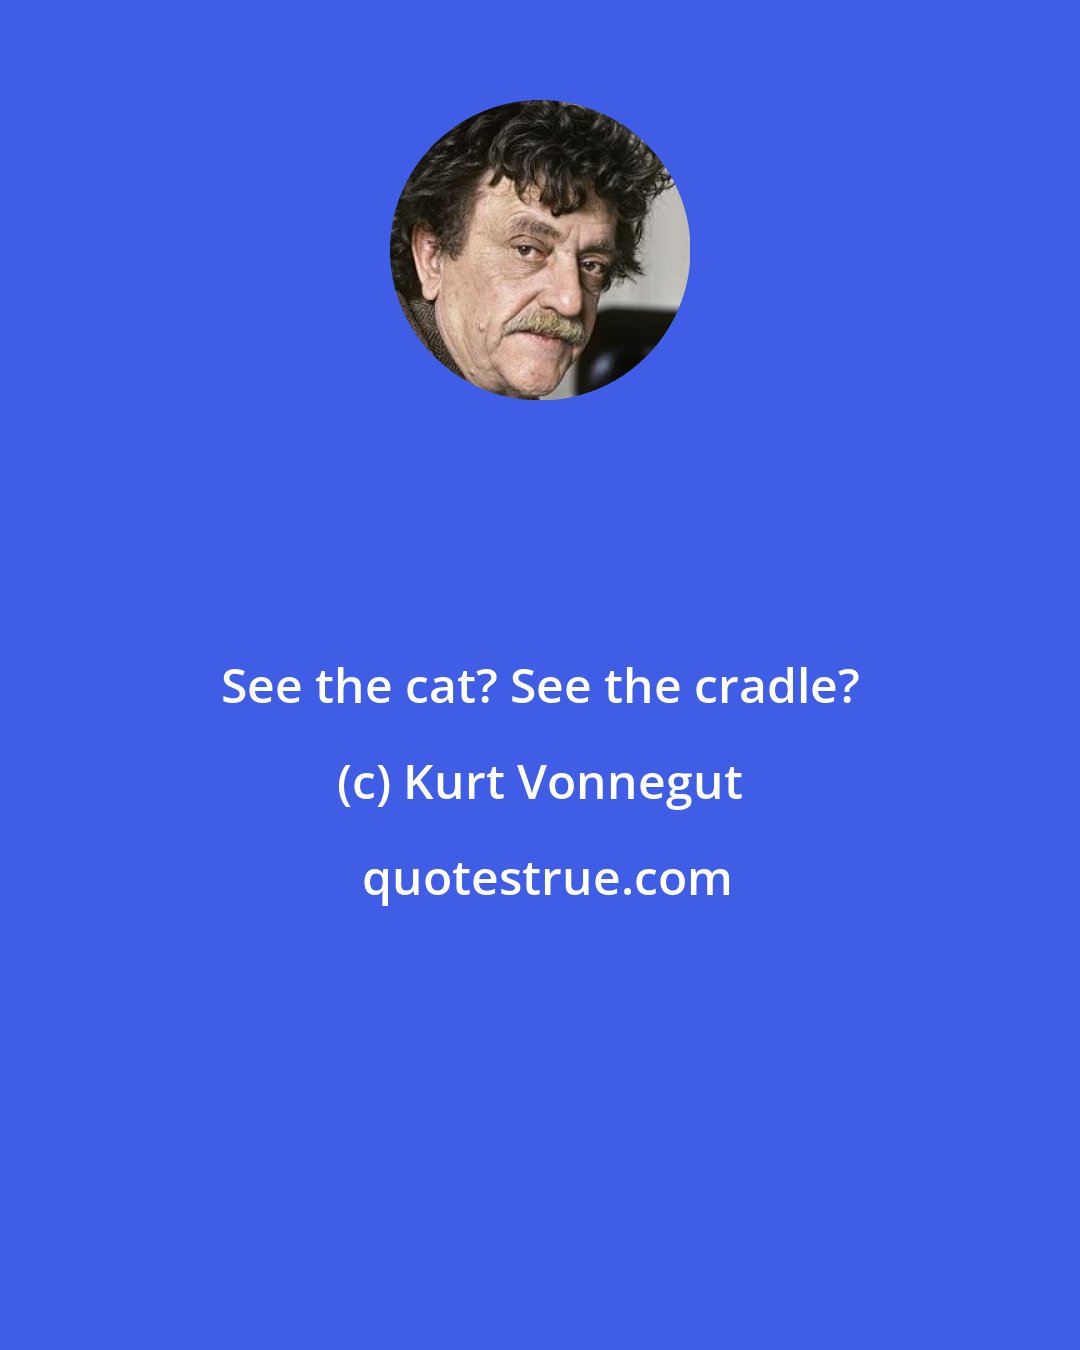 Kurt Vonnegut: See the cat? See the cradle?